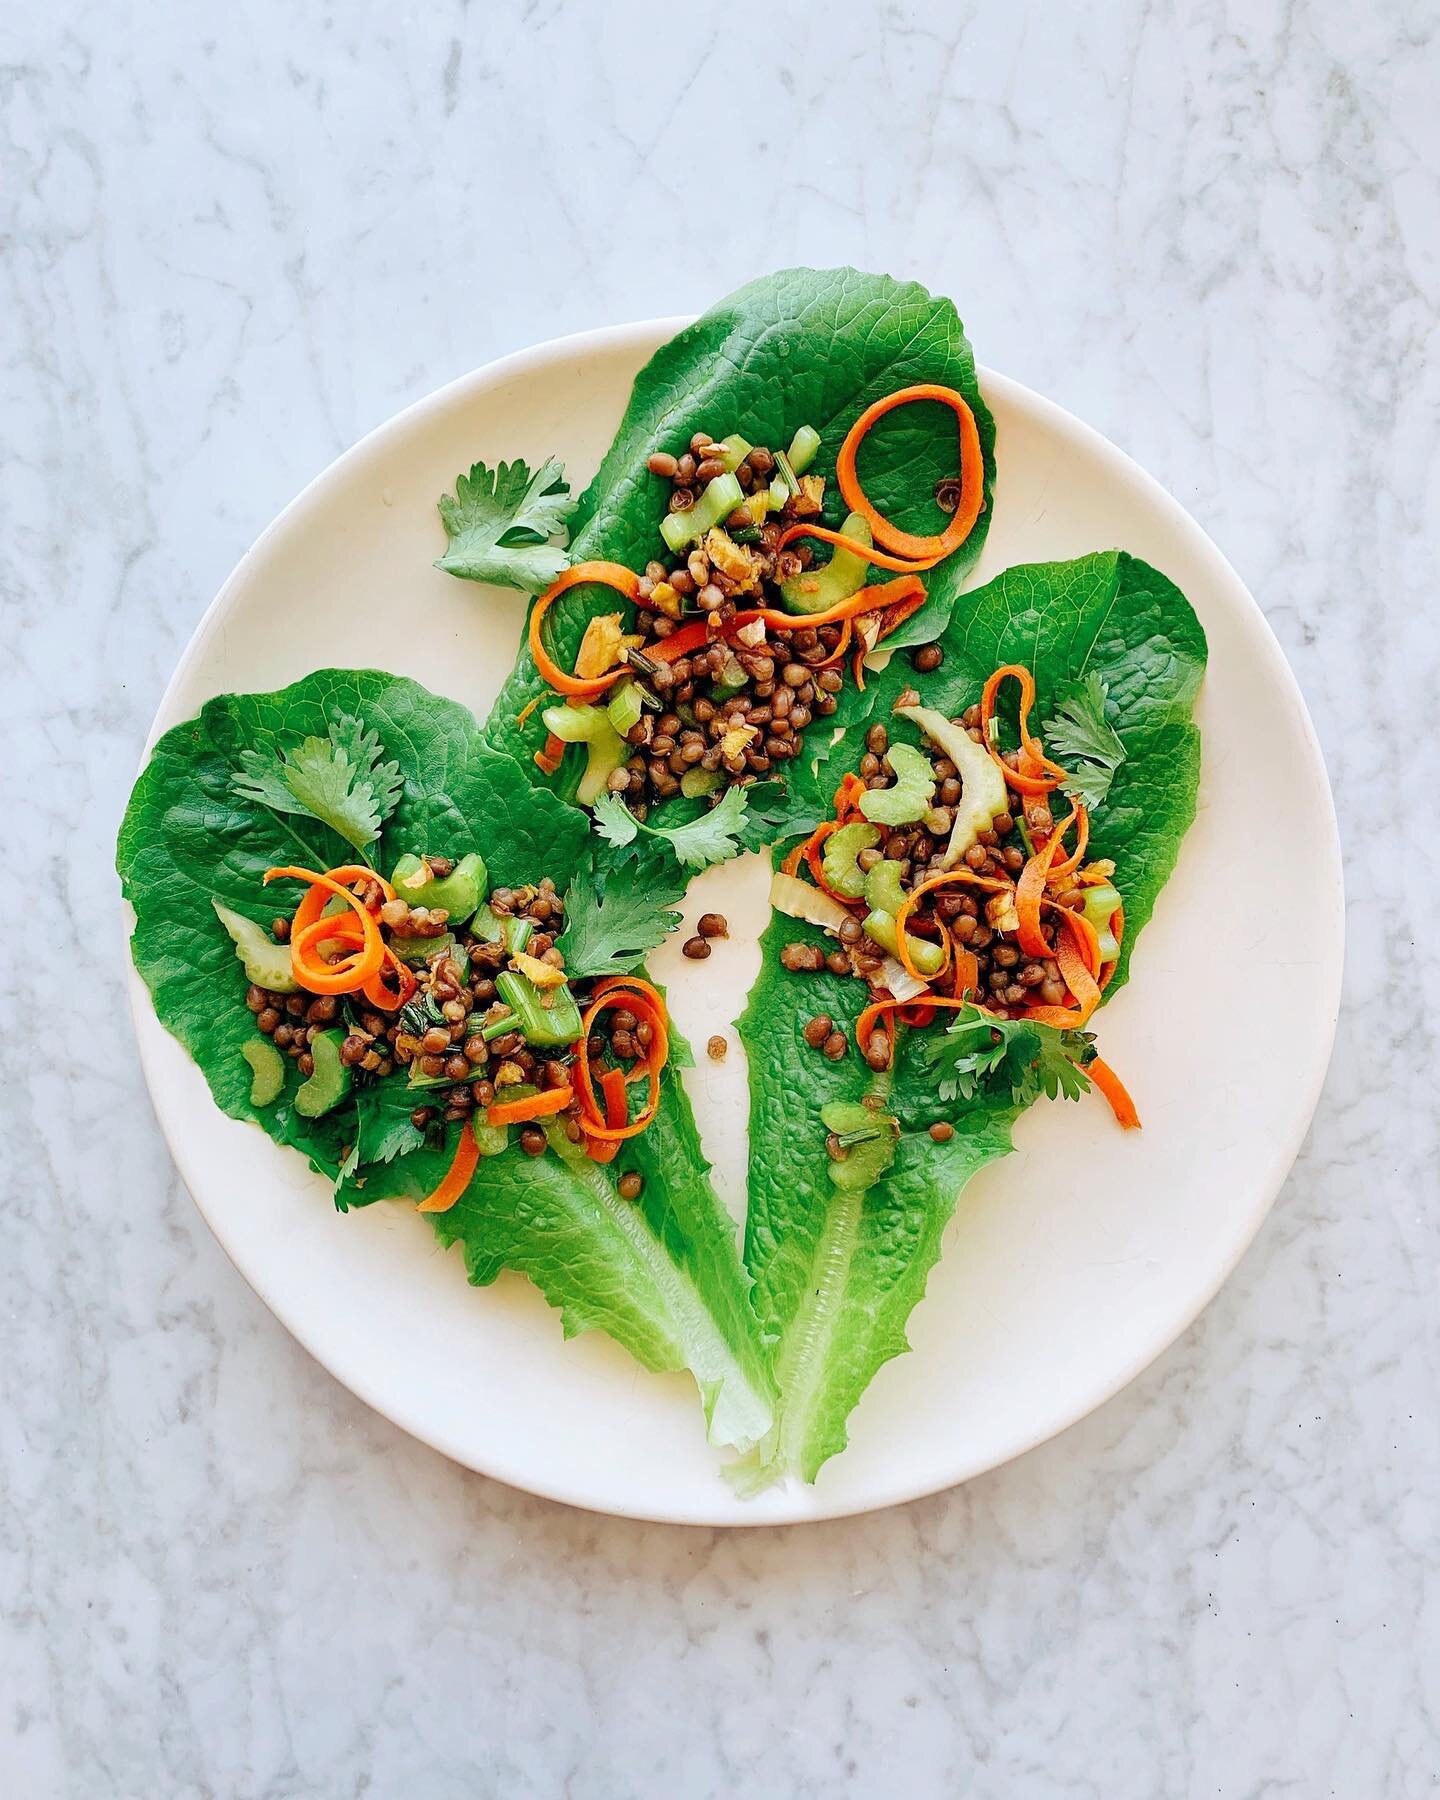 LENTIL LETTUCE WRAPS for Summertime lunchin&rsquo; 💫 These wraps from the @theclass cleanse are the simplest lunch on warm July days, when it&rsquo;s just too hot to be in the kitchen. 🥵 Made with @edenfoods soaked lentils, carrot spirals, saut&eac